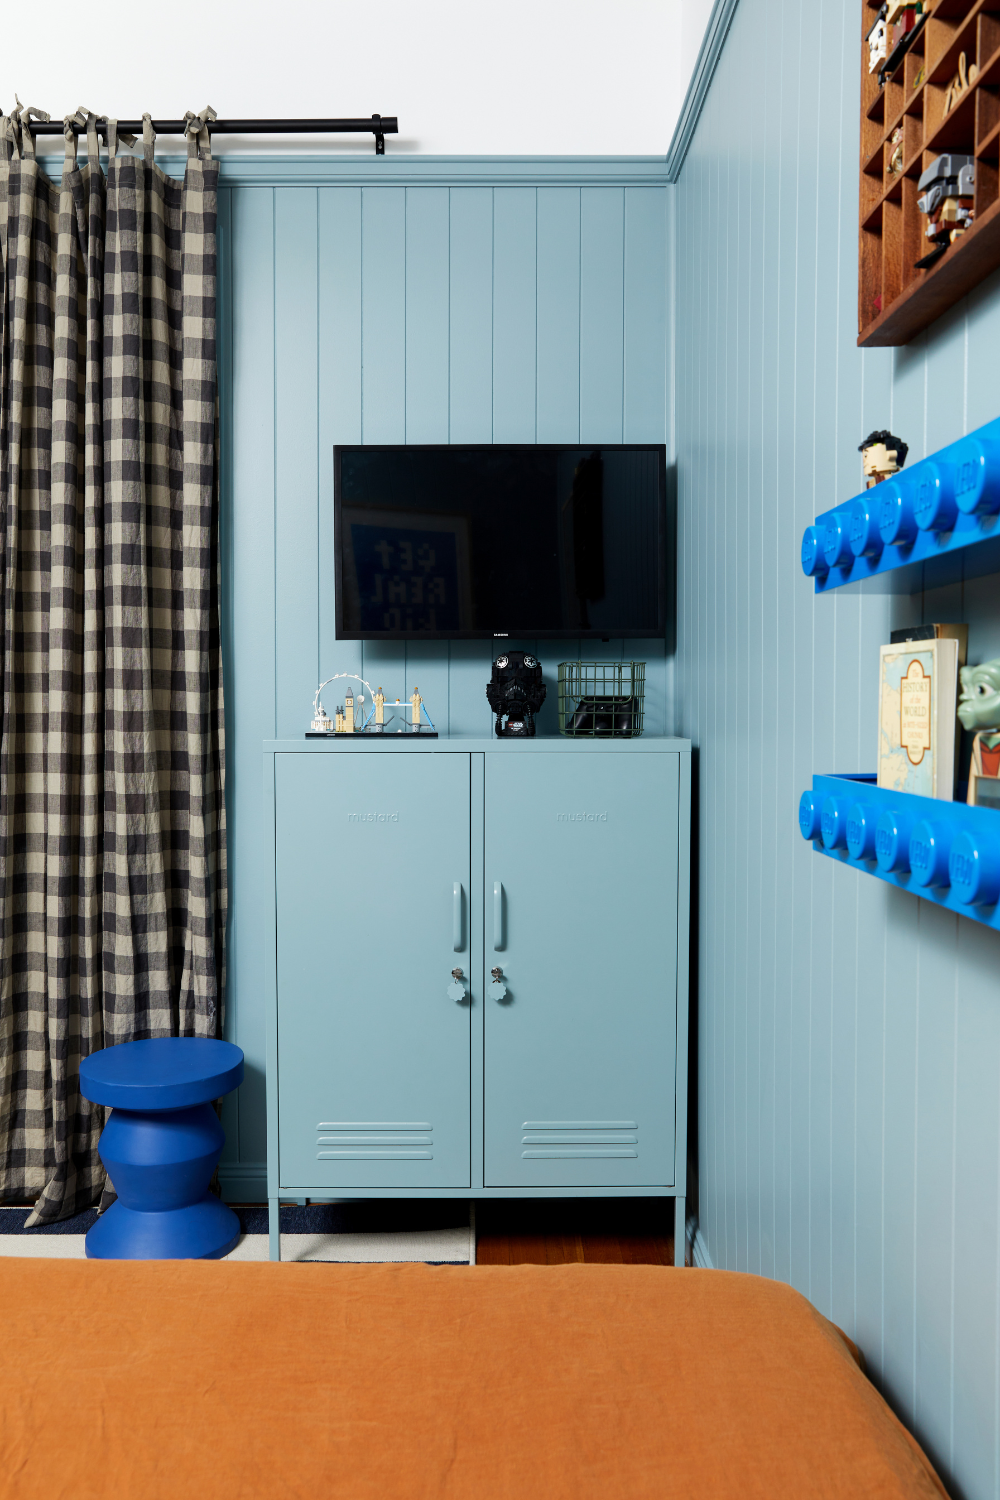 An Ocean Midi is styled in a teenager's bedroom with matching Ocean coloured walls. There is a TV mounted above it and lego shelving on the walls.